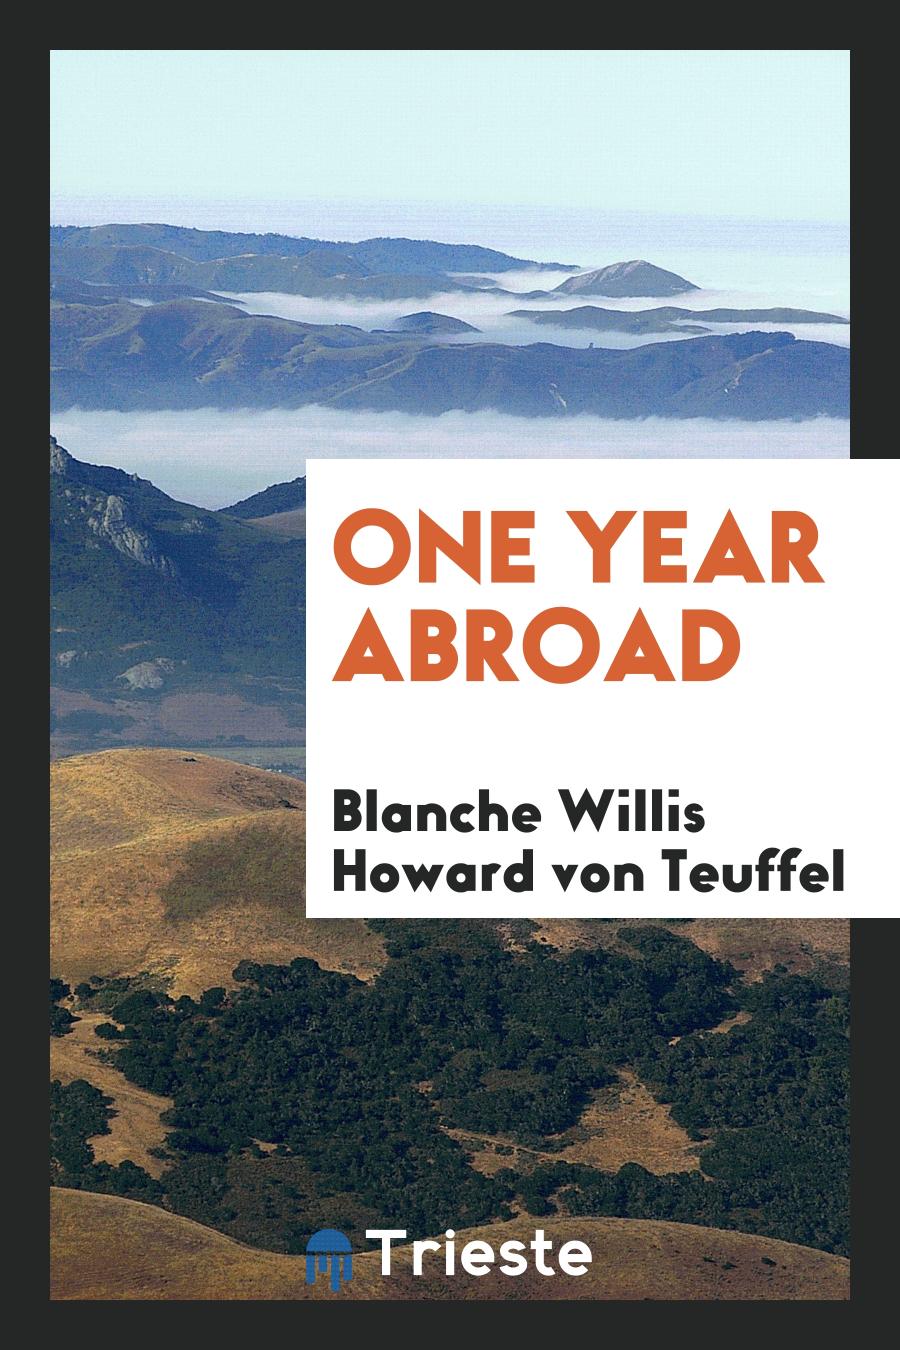 One year abroad